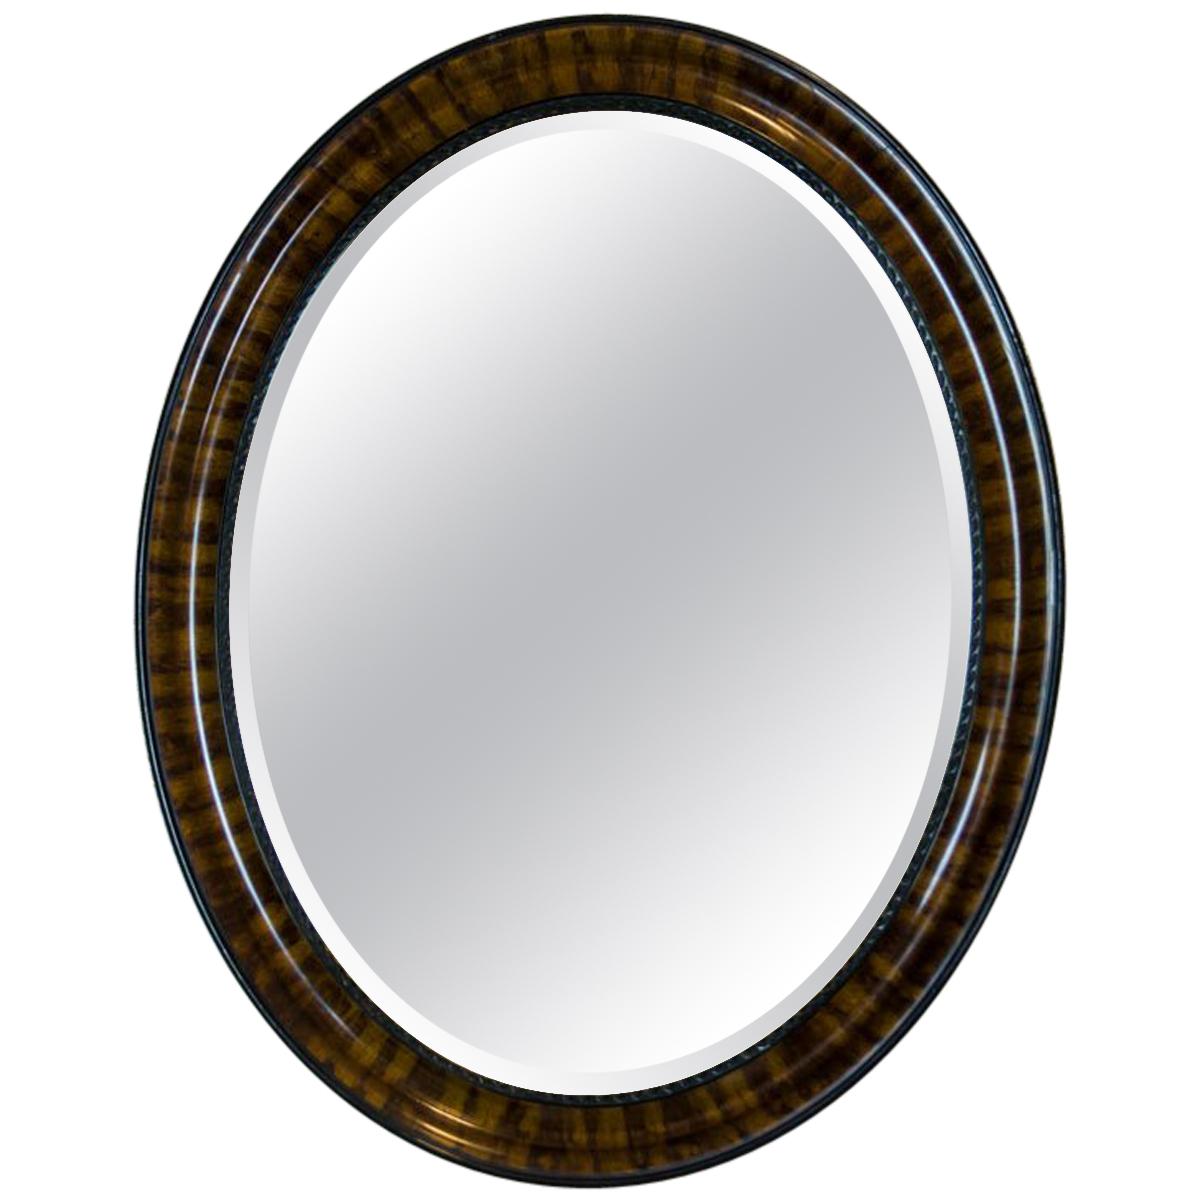 Oval Mirror from the 1930s